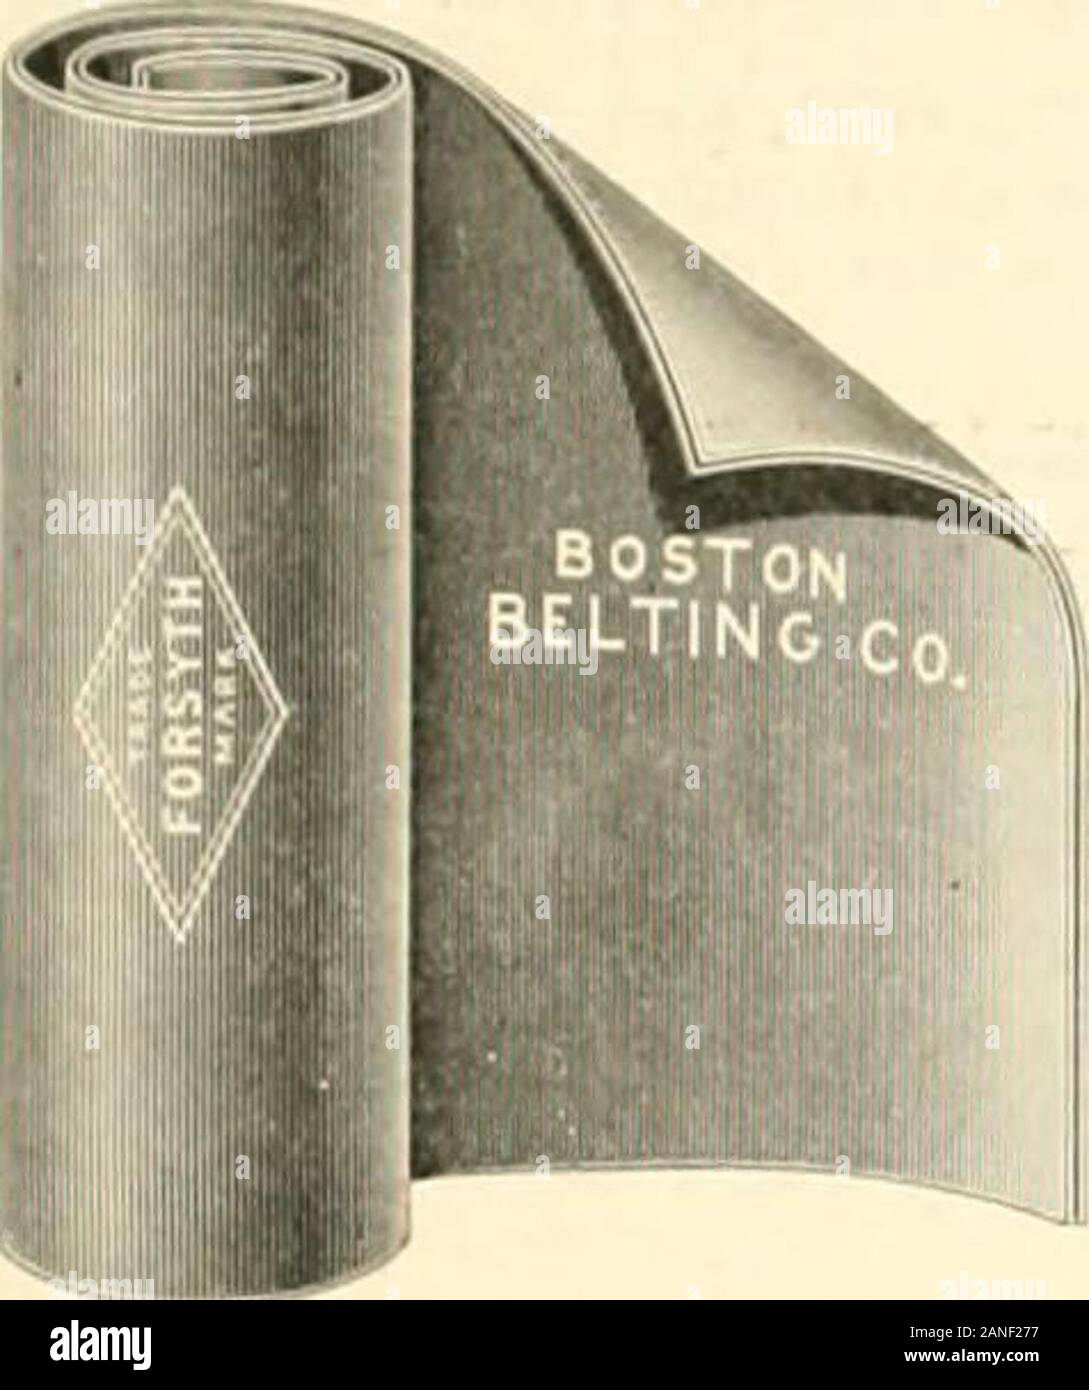 India rubber world . June i, 1903.] THE INDIA RUBBER WORLD in I Forsyth Combination Hetal | I Insertion Packing | will satisfactorily withstand the heat of high pressure steam. ^ It is a high grade rubber packing with one or more plies ^of pliable sheet metal insertion. A successful packing that satisfies where other packings fail. ^ CAUTION. I As the exclusive manufacturers of sheet metal insertion rubber pack- 13 ing, under a patent issued April 11, 1899, to James Bennett Forsyth, |3 we caution all parties against making, selling or using any rubber pac :k- riS ing with sheet metal insertion Stock Photo